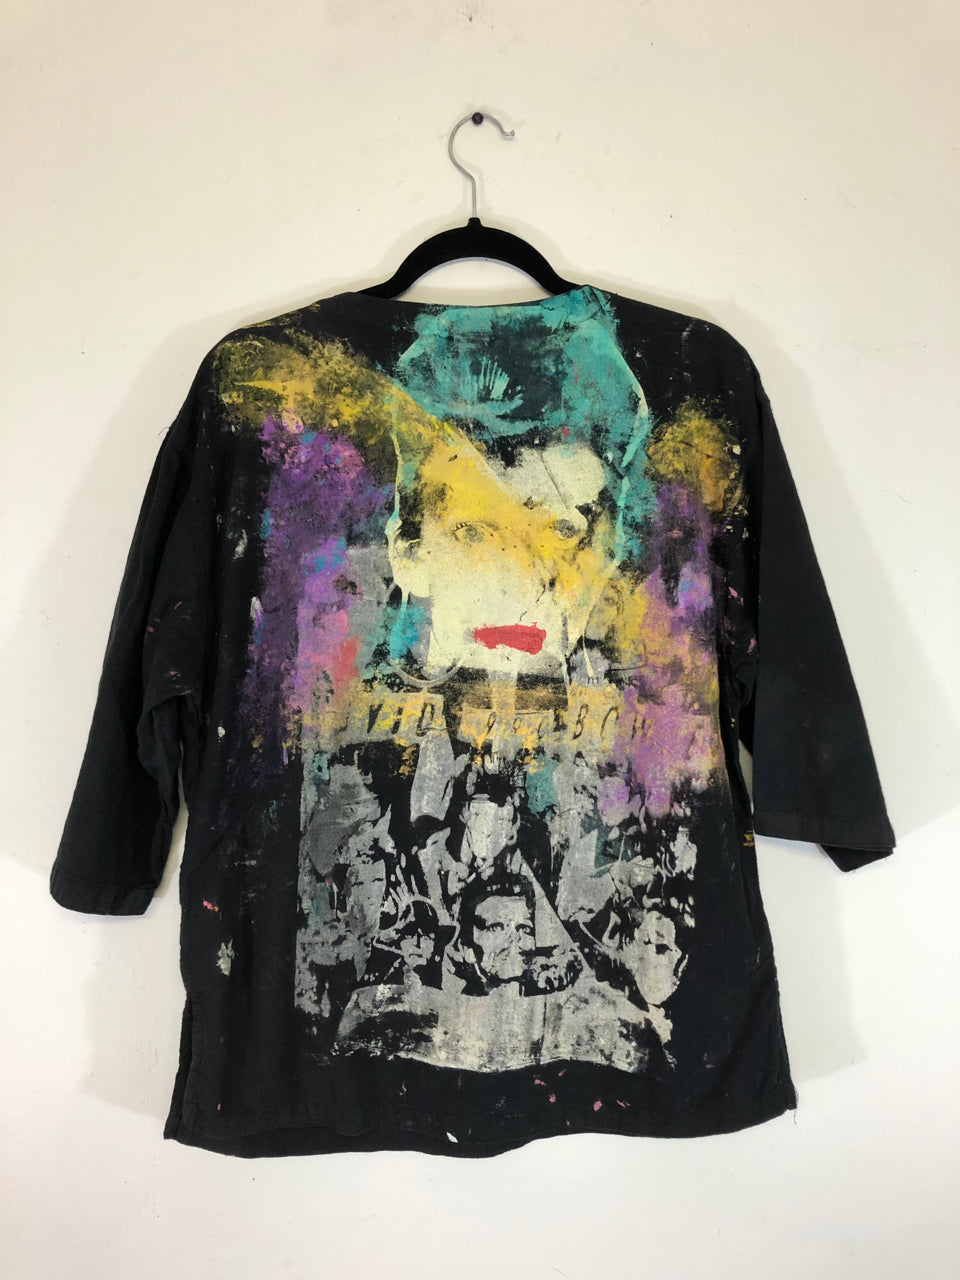 David Bowie Hand Painted Black T-Shirt